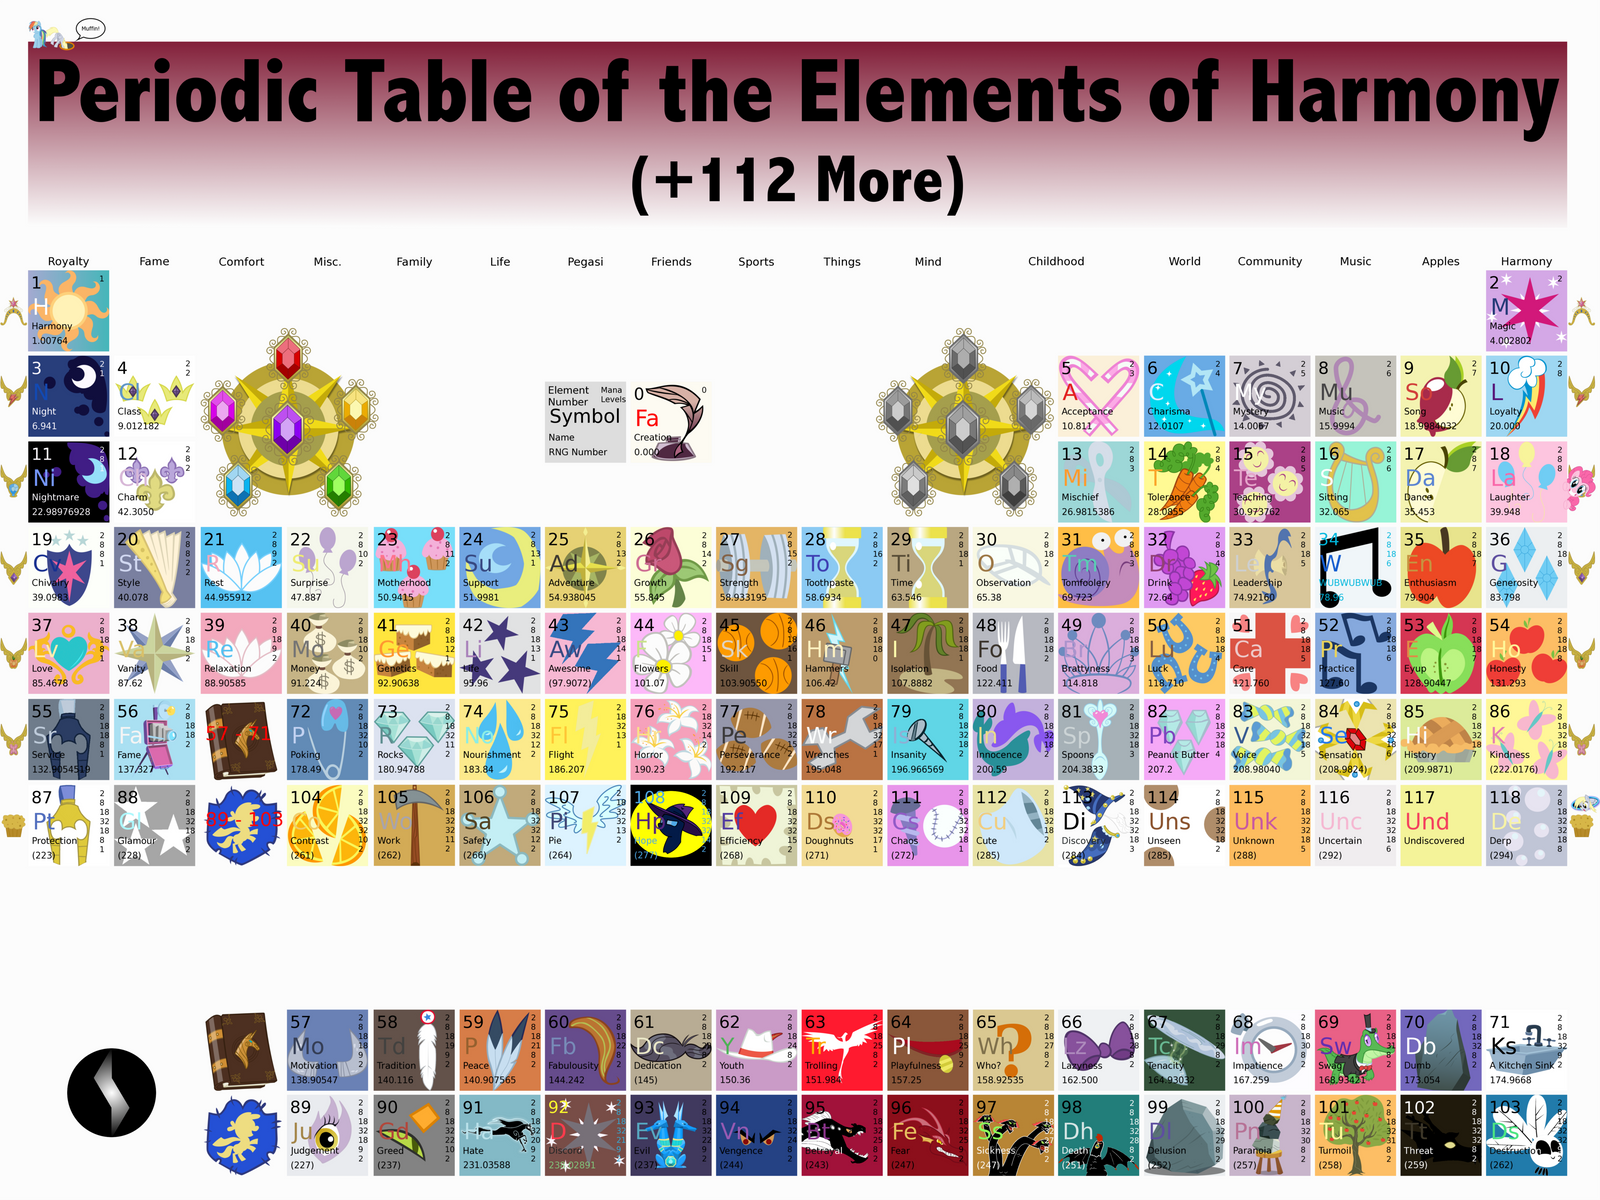 Periodic Table of the Elements of Harmony by MetalGearSamus on DeviantArt